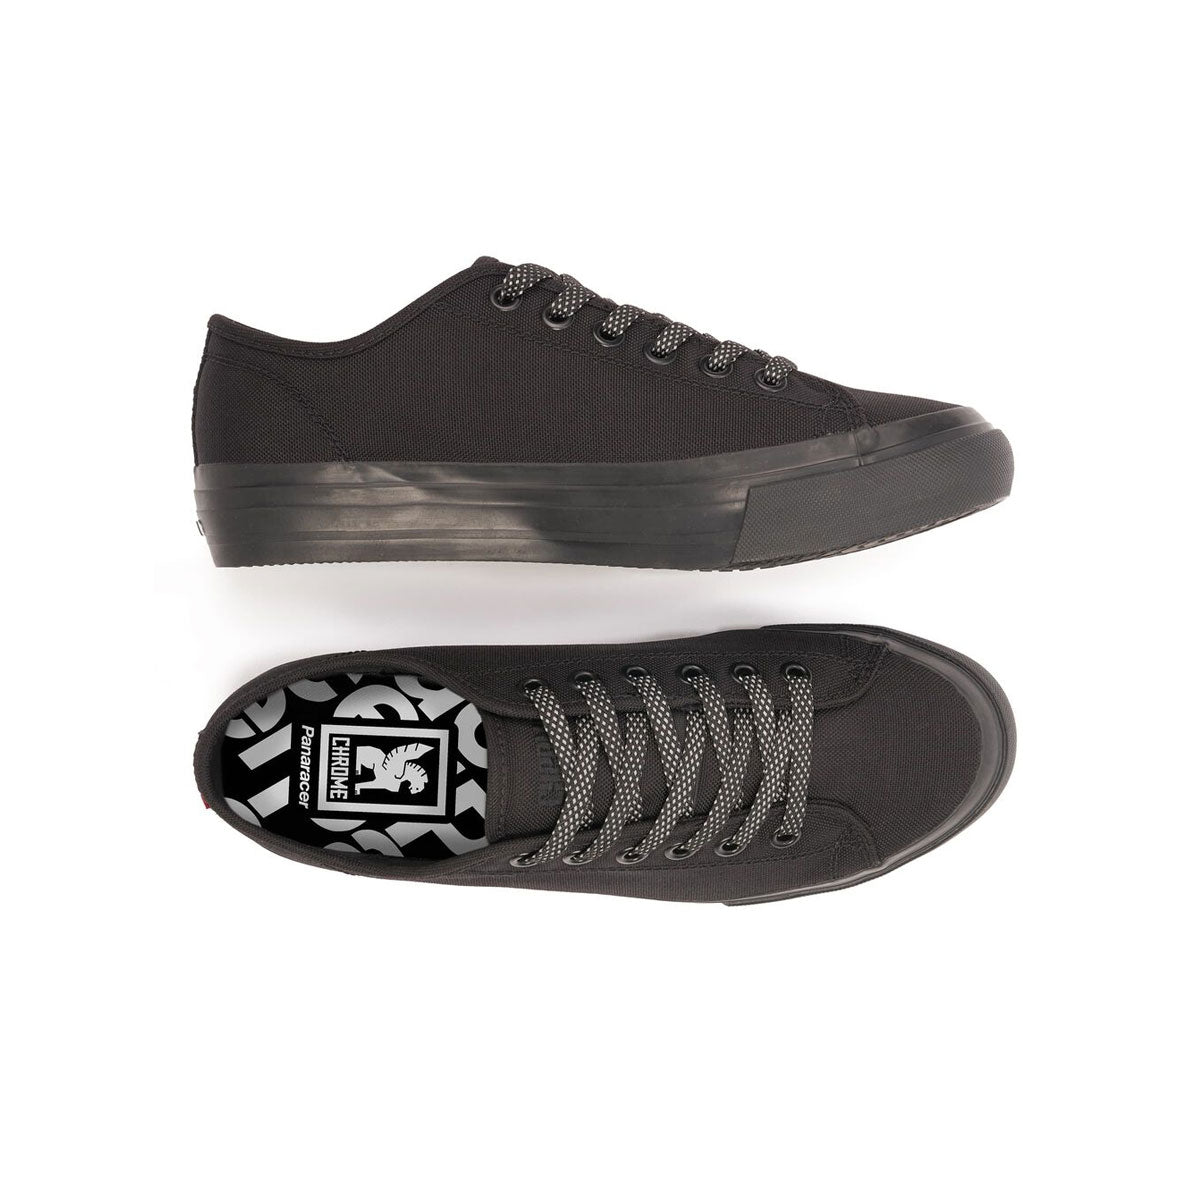 Chrome Industries : Kursk AW Pro Sneaker : Night Reflective